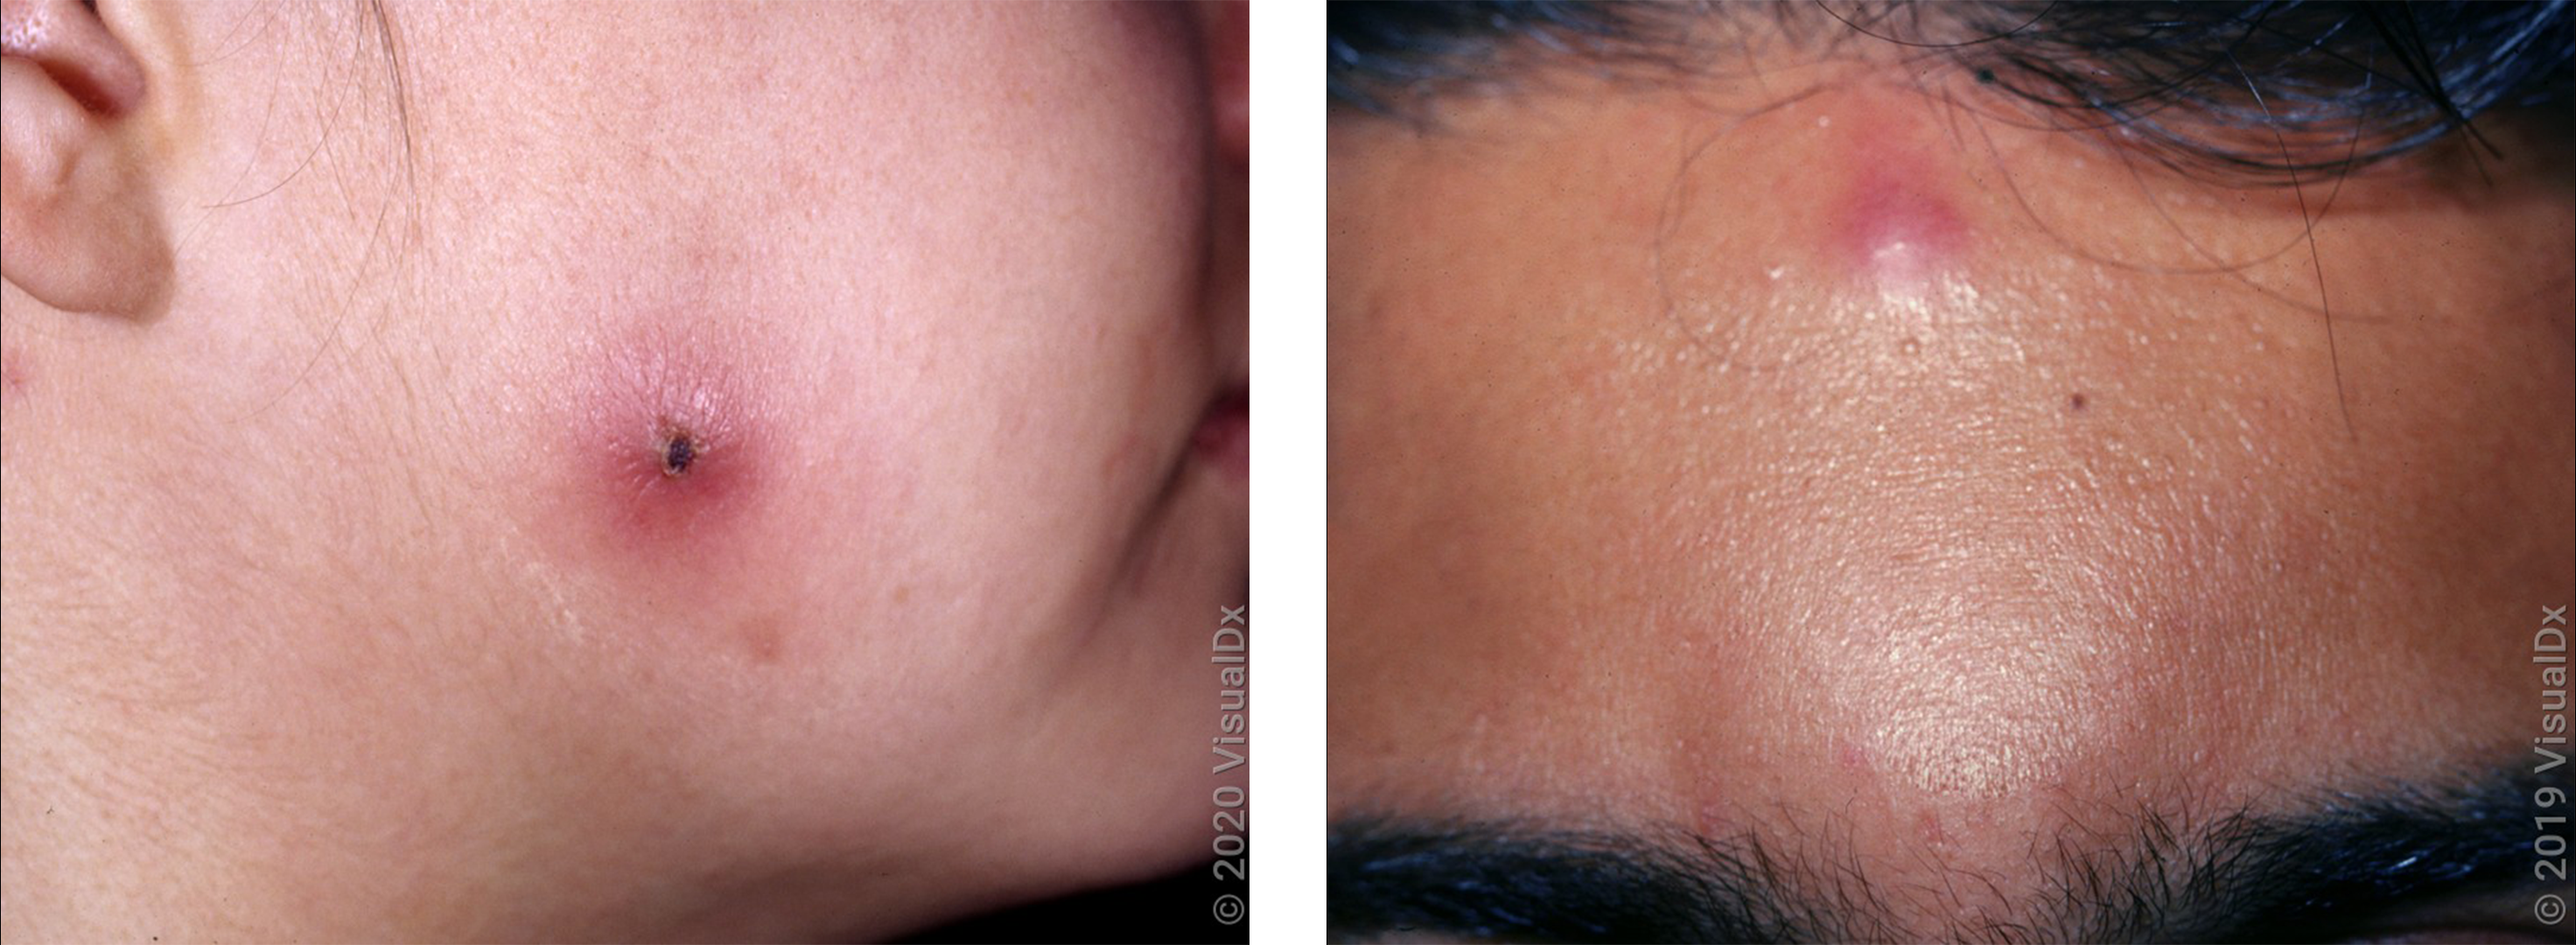 Left: Close-up of a cheek with a large, crusty, red bump from a spider bite. Right: A forehead with a smooth, shiny, red bump from a spider bite. 